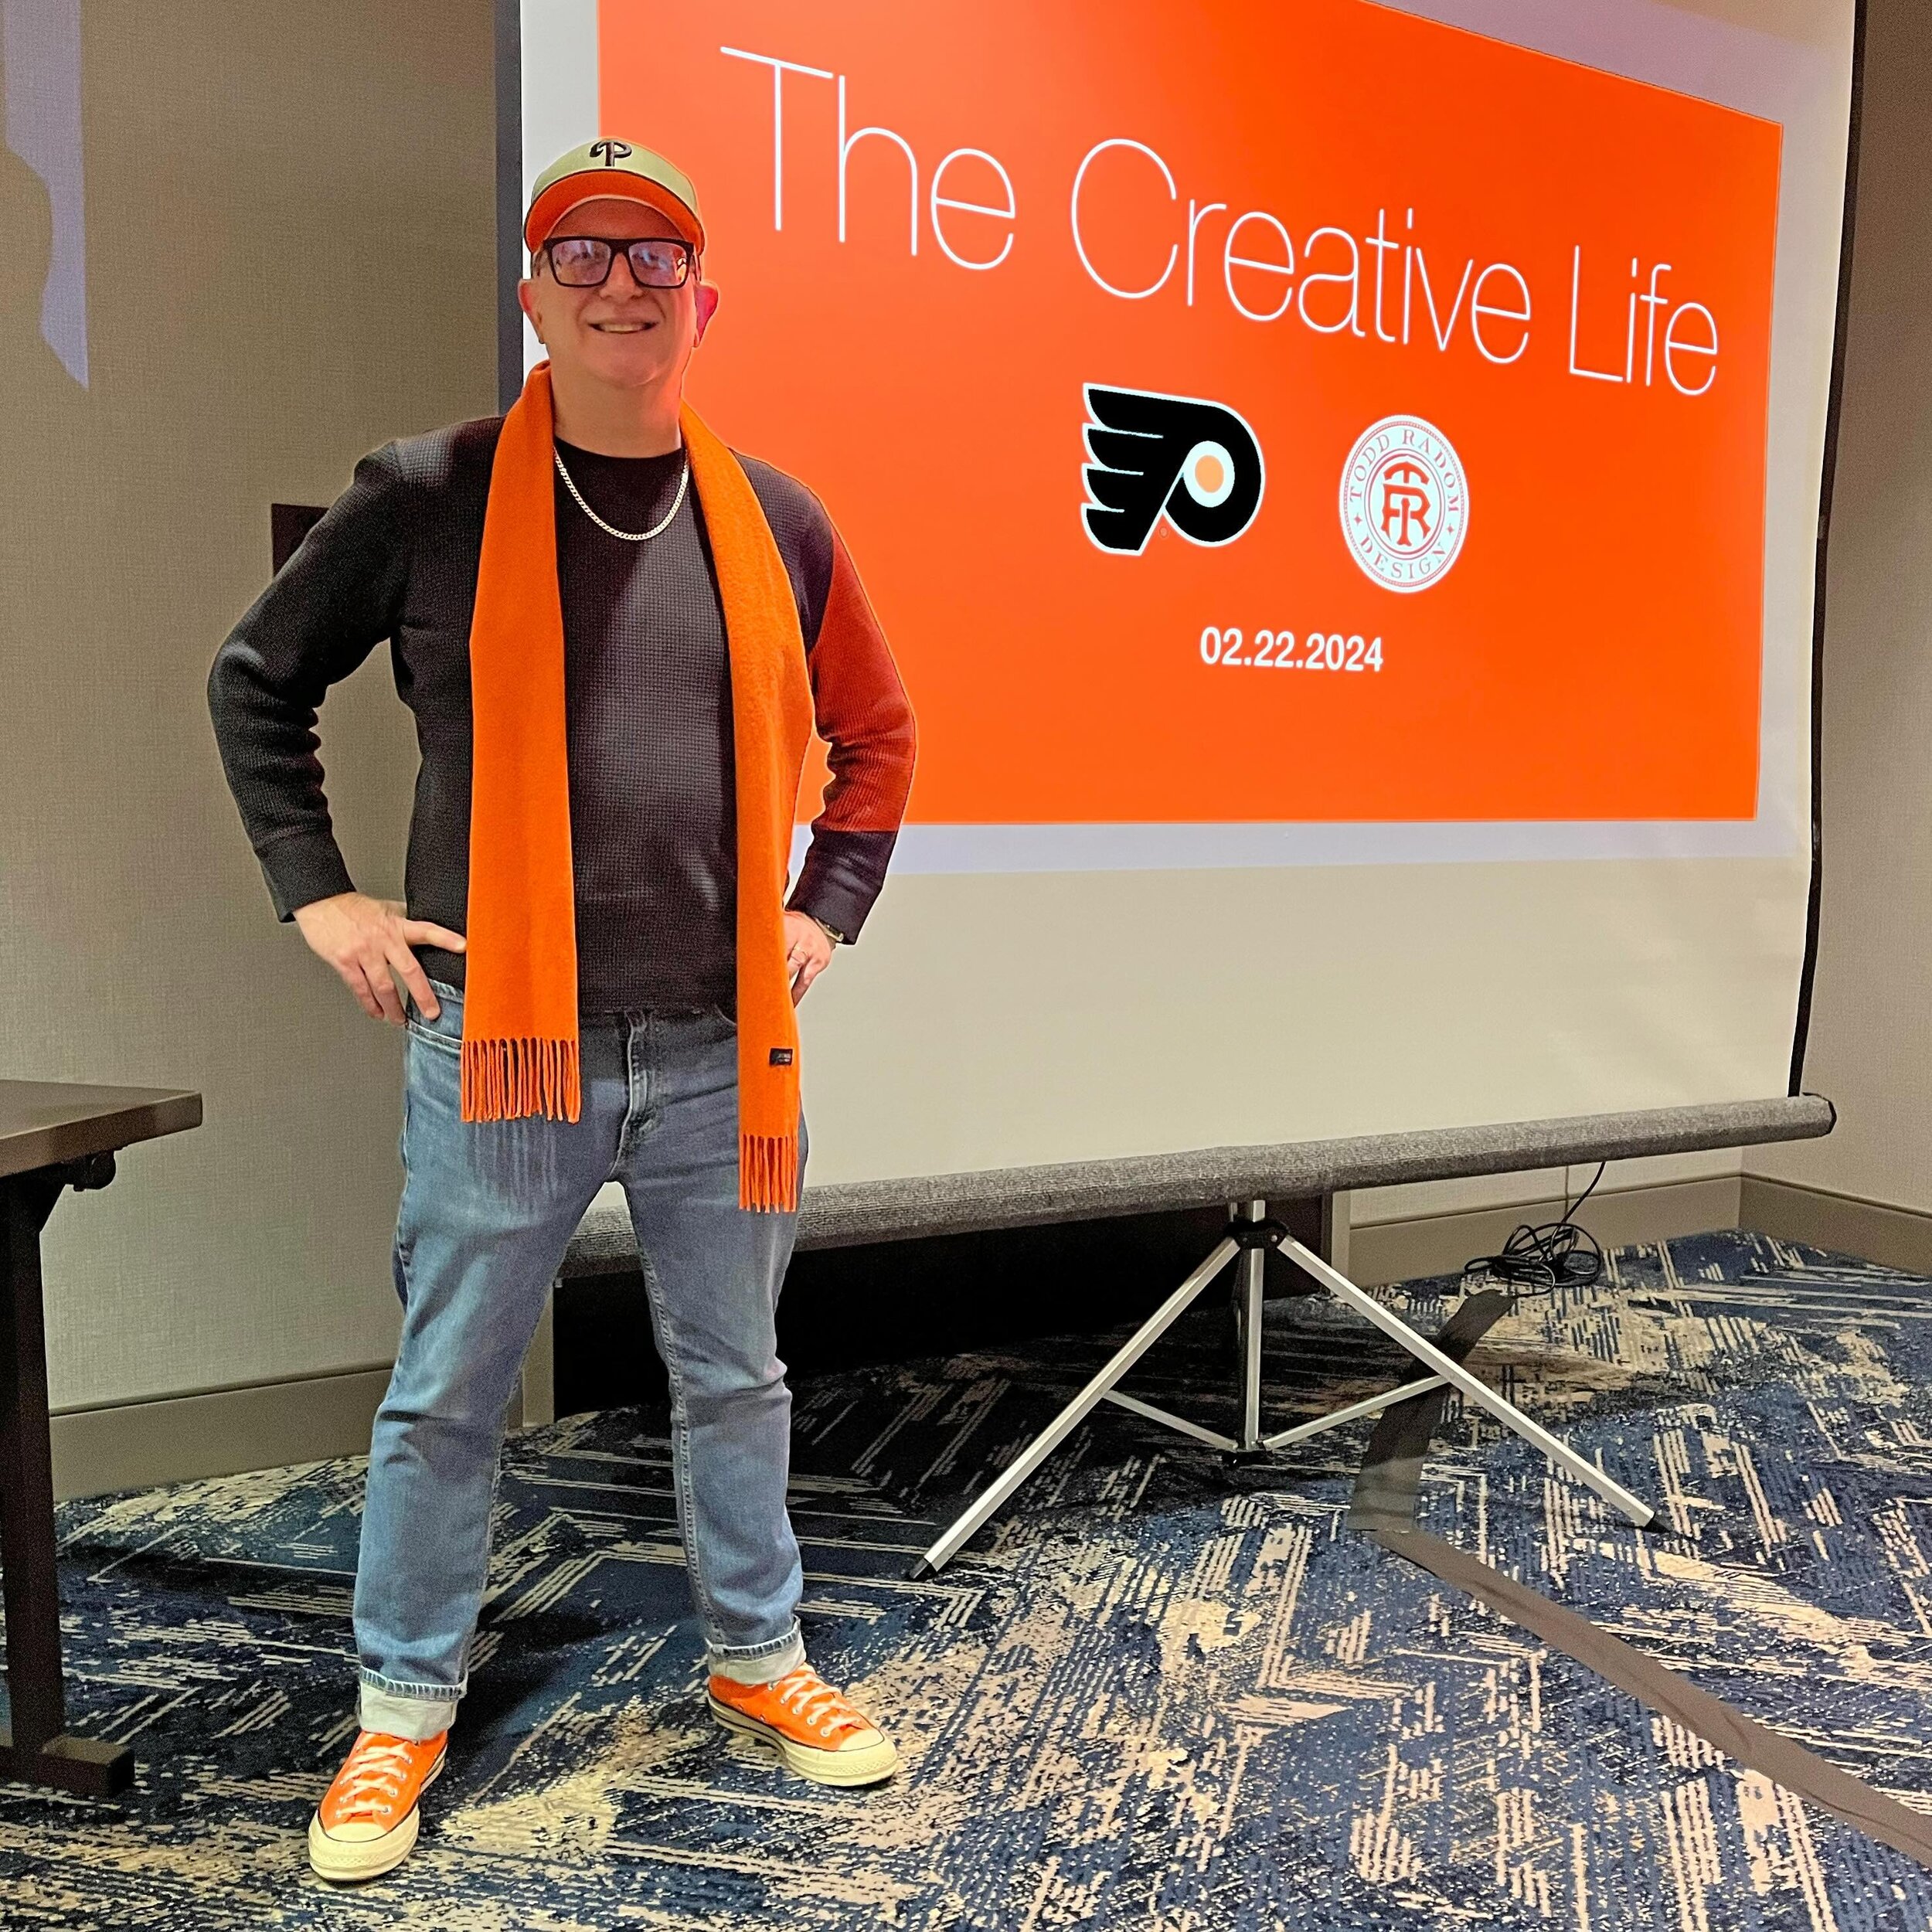 A fun night with the Philadelphia Flyers Fan Club&ndash;thanks for the opportunity to discuss my creative journey 🟠⚫️